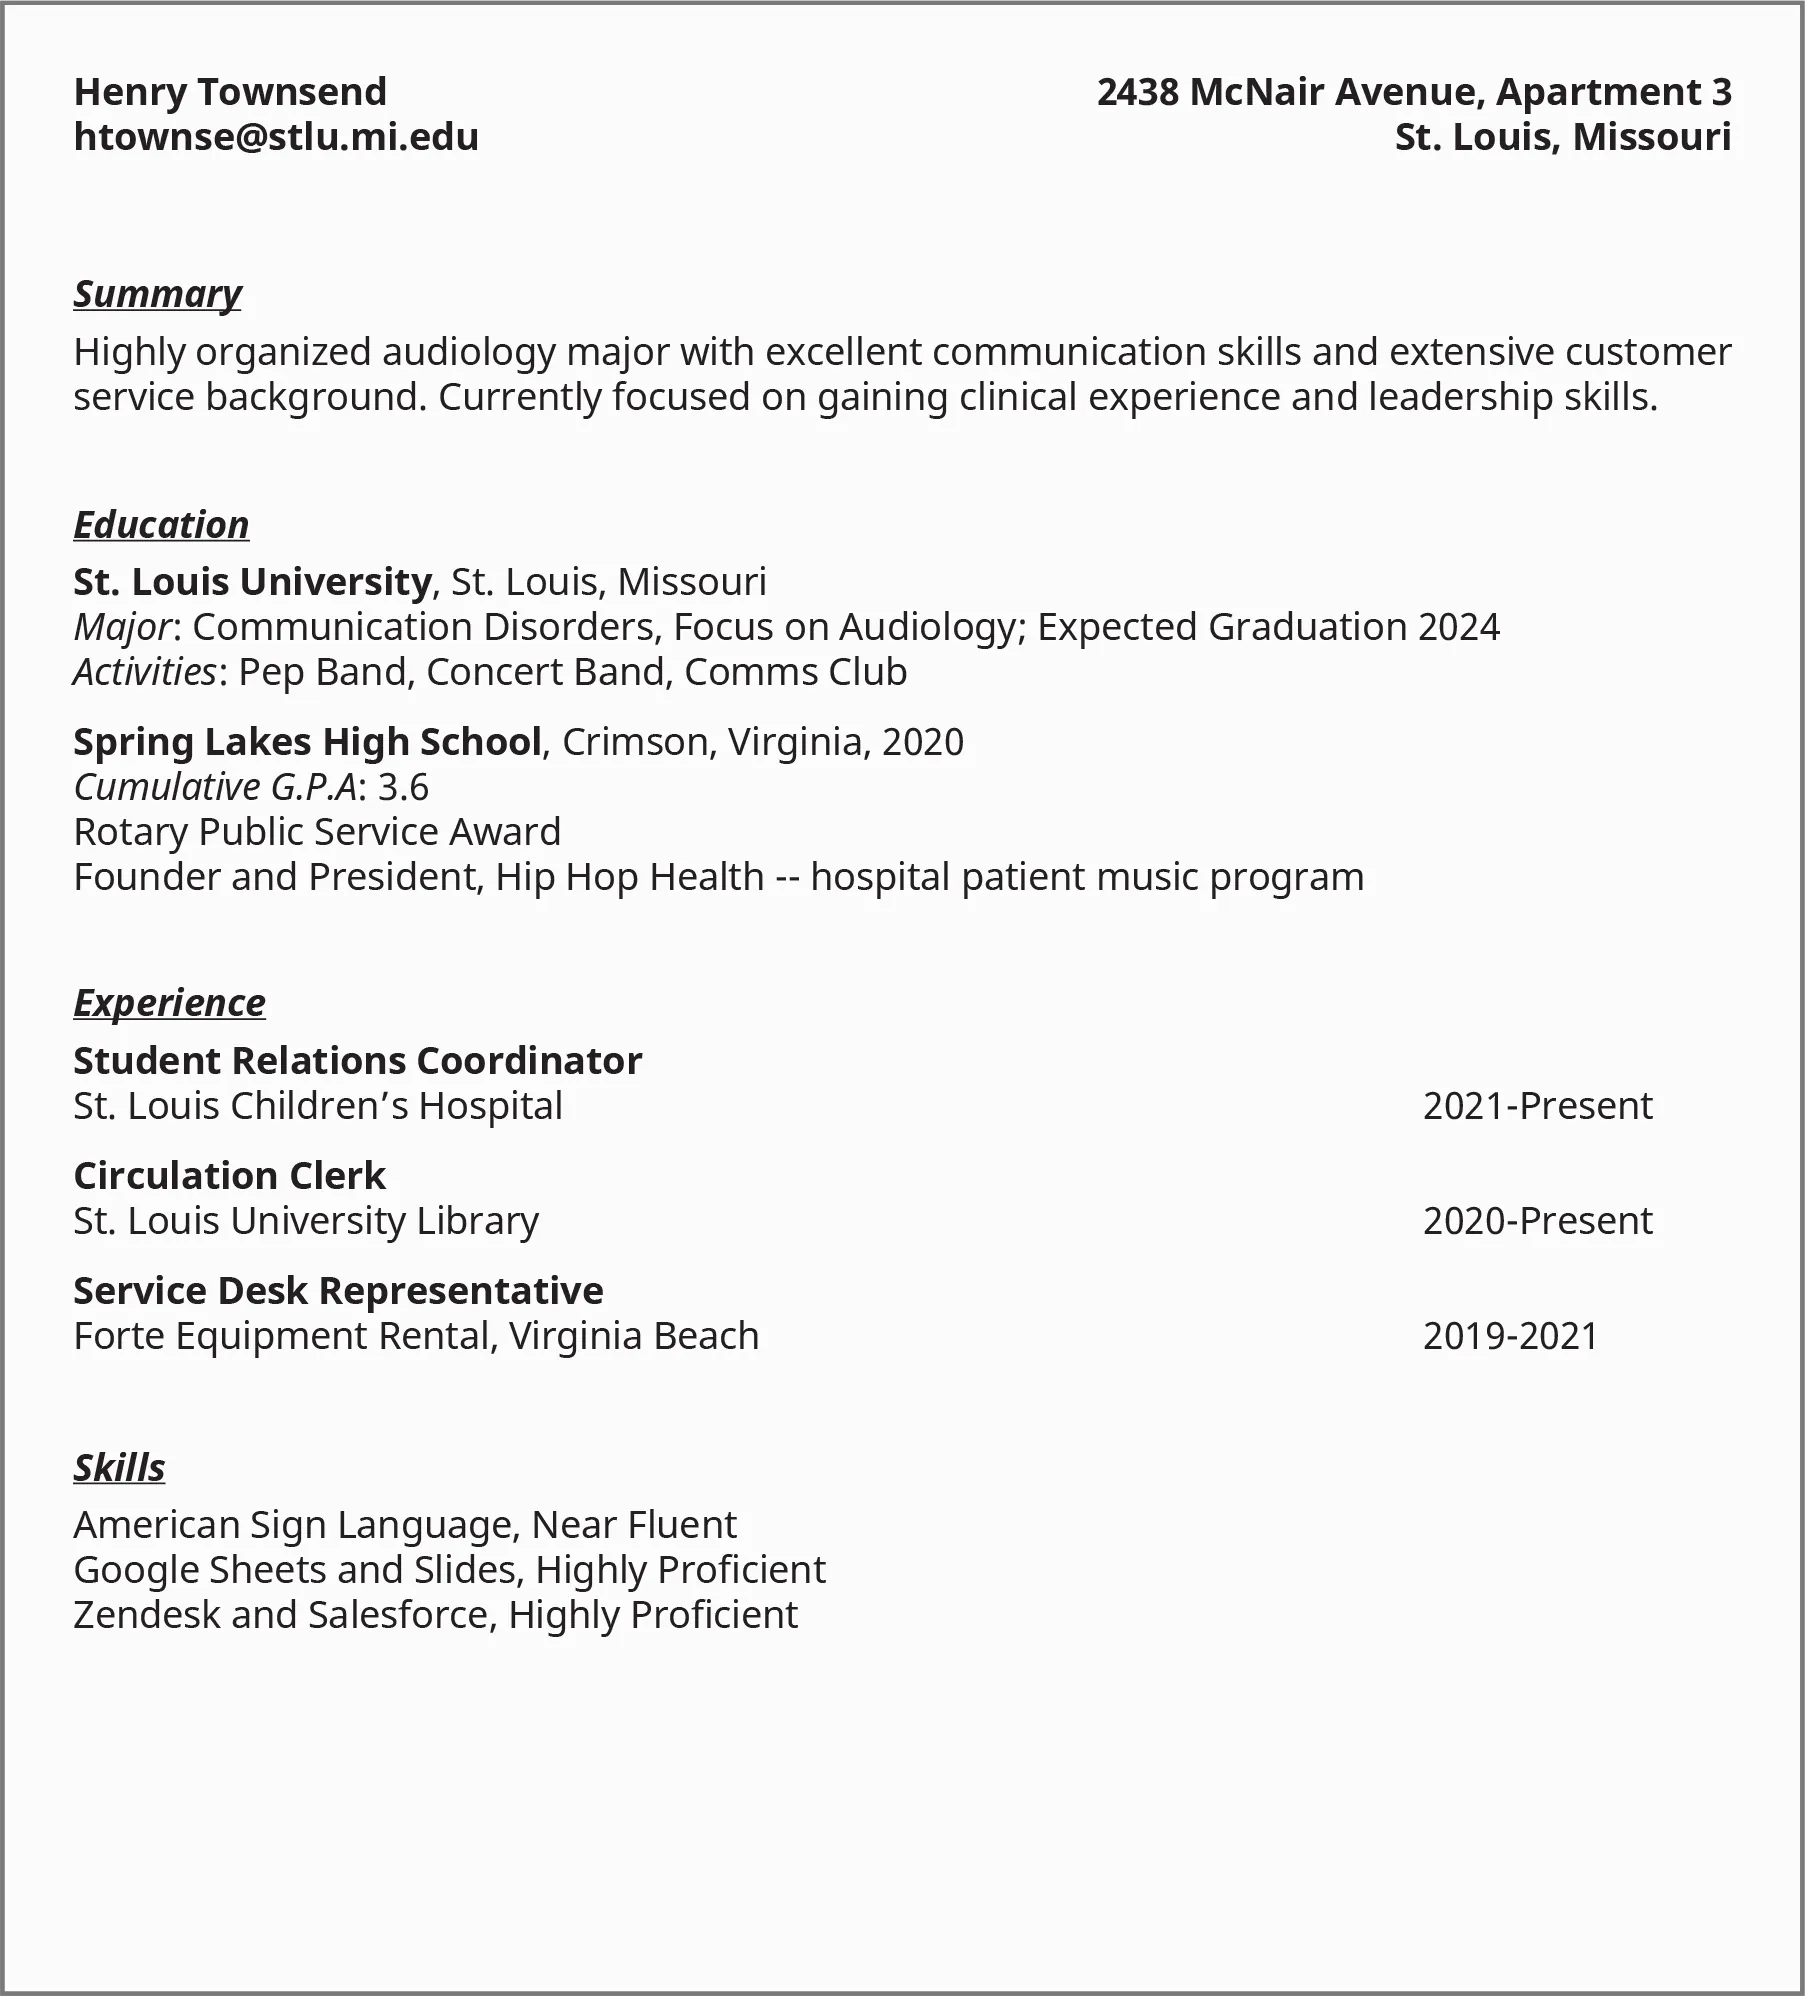 An image shows a sample resume from a college student listing details under the heads “Summary,” “Education,” “Experience,” and “Skills.”